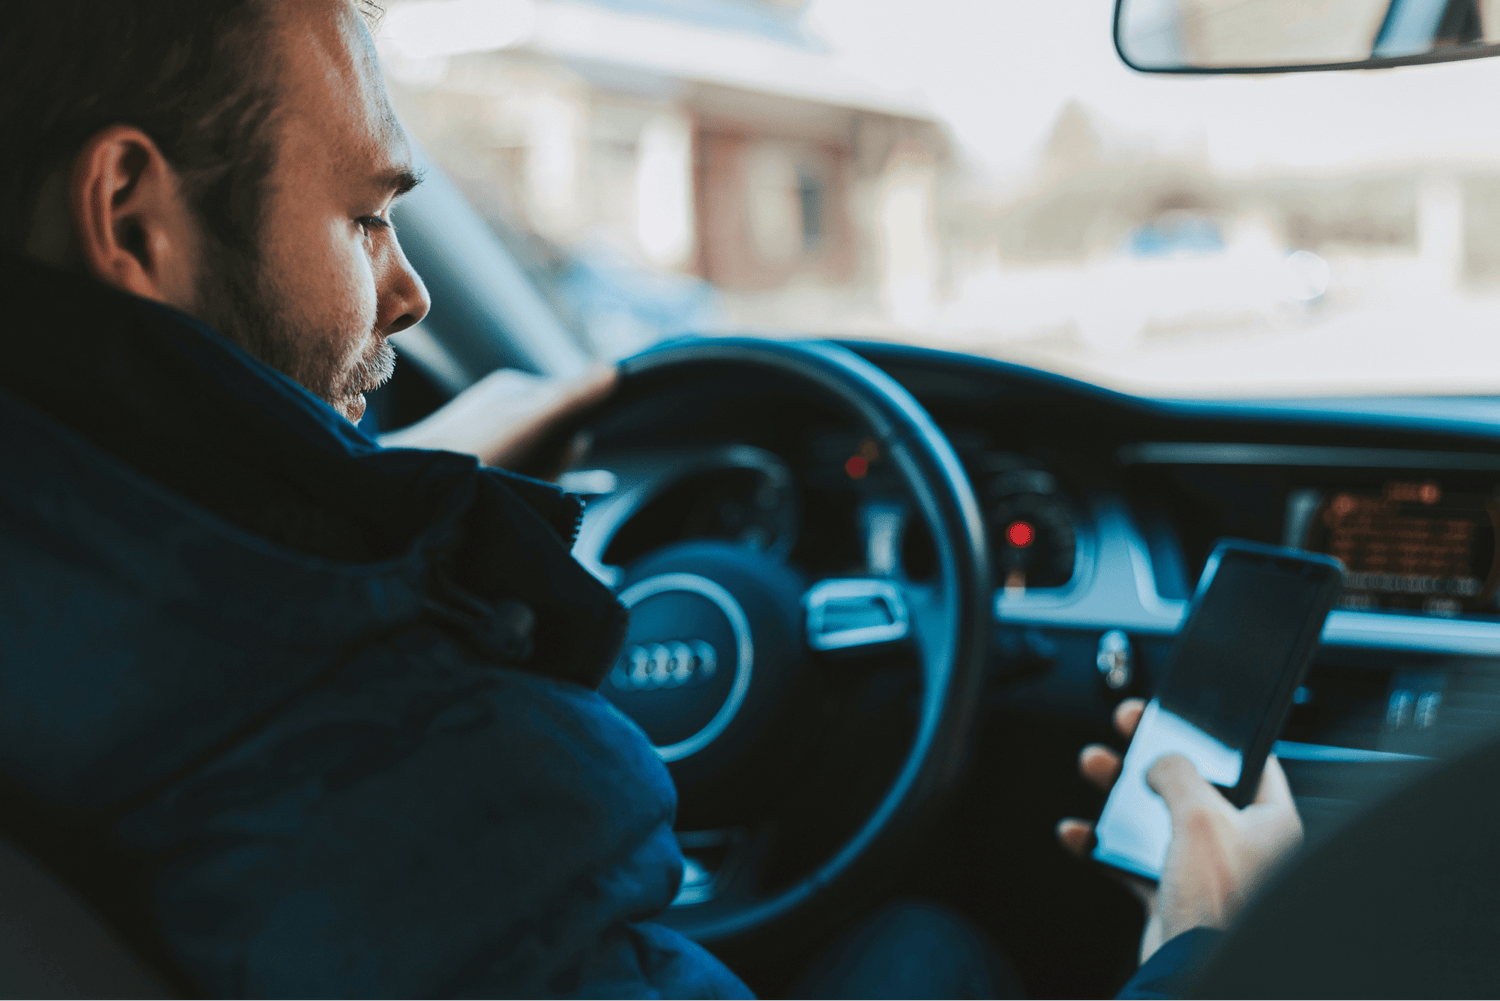 Man driving unsafely with phone in his hand